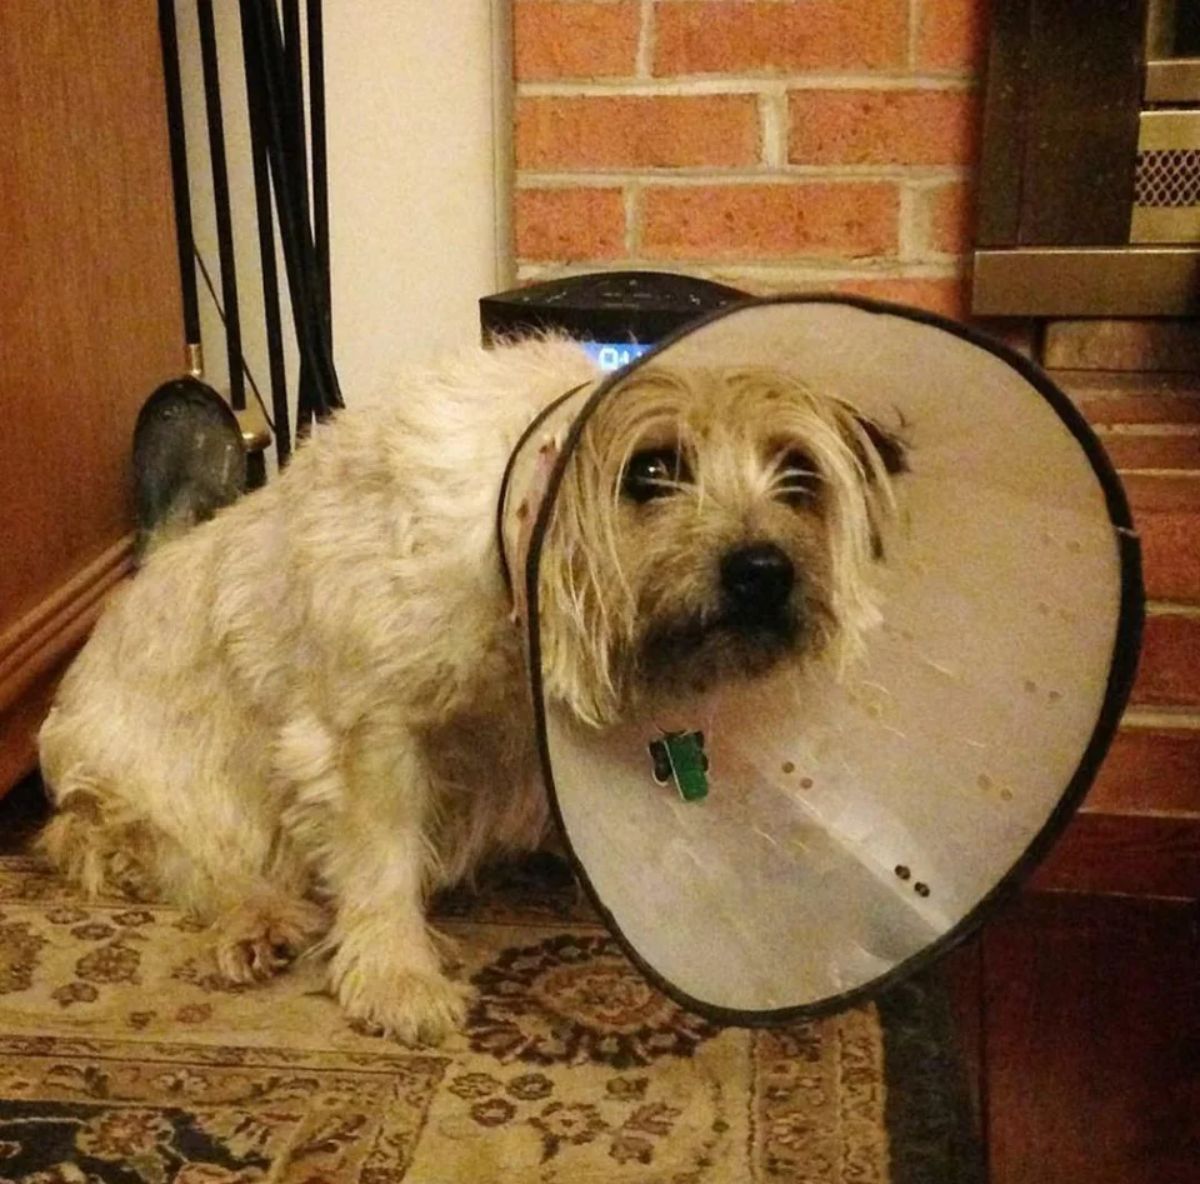 fluffy white dog in a white cone of shame and looking sad